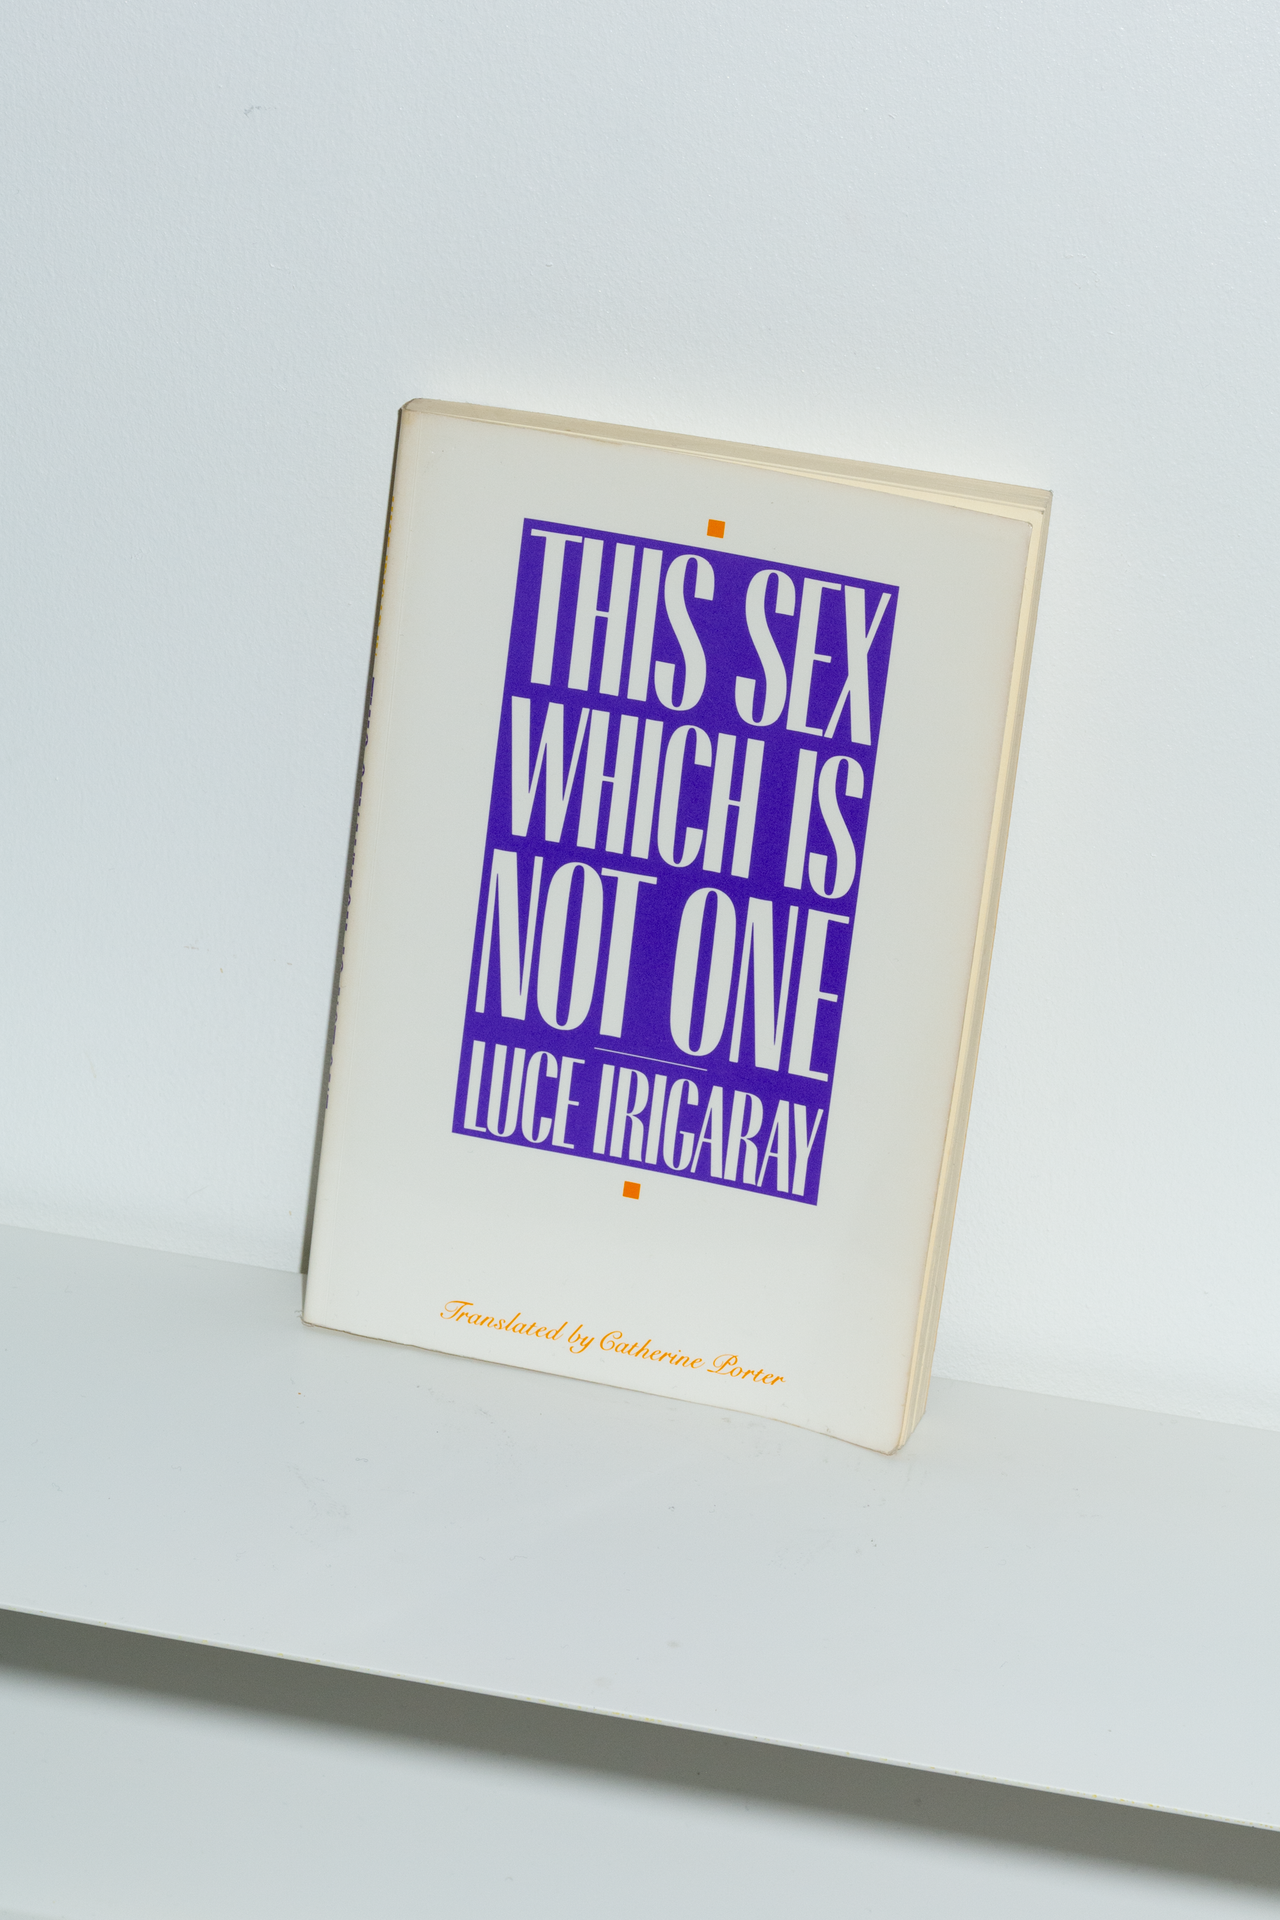 This Sex Which Is Not One - Luce Irigaray